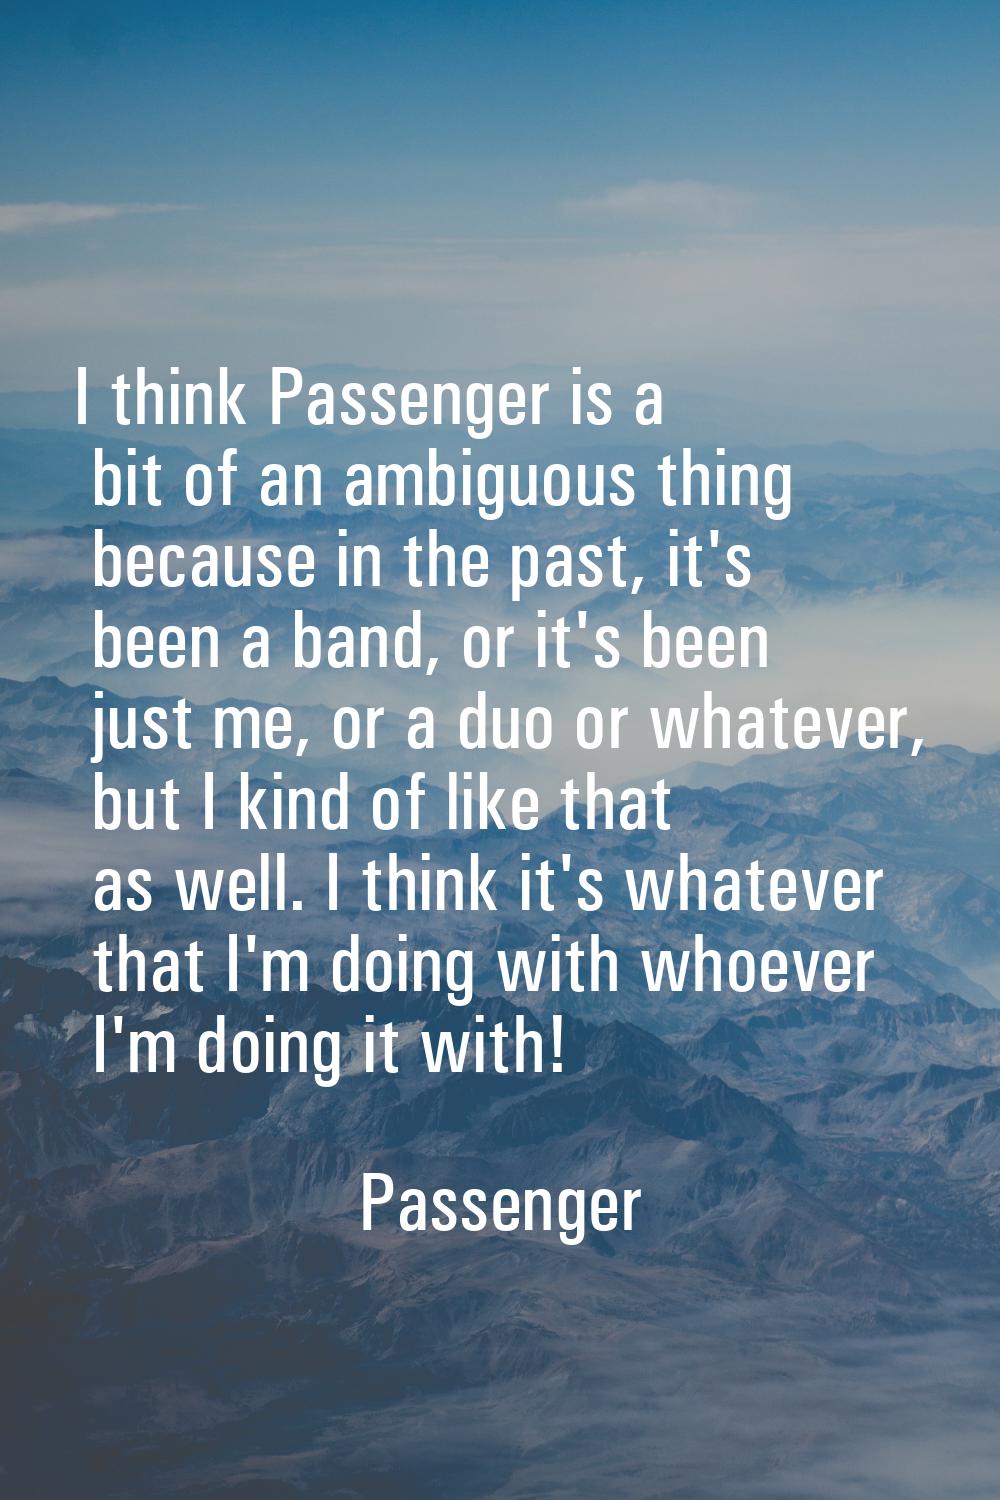 I think Passenger is a bit of an ambiguous thing because in the past, it's been a band, or it's bee